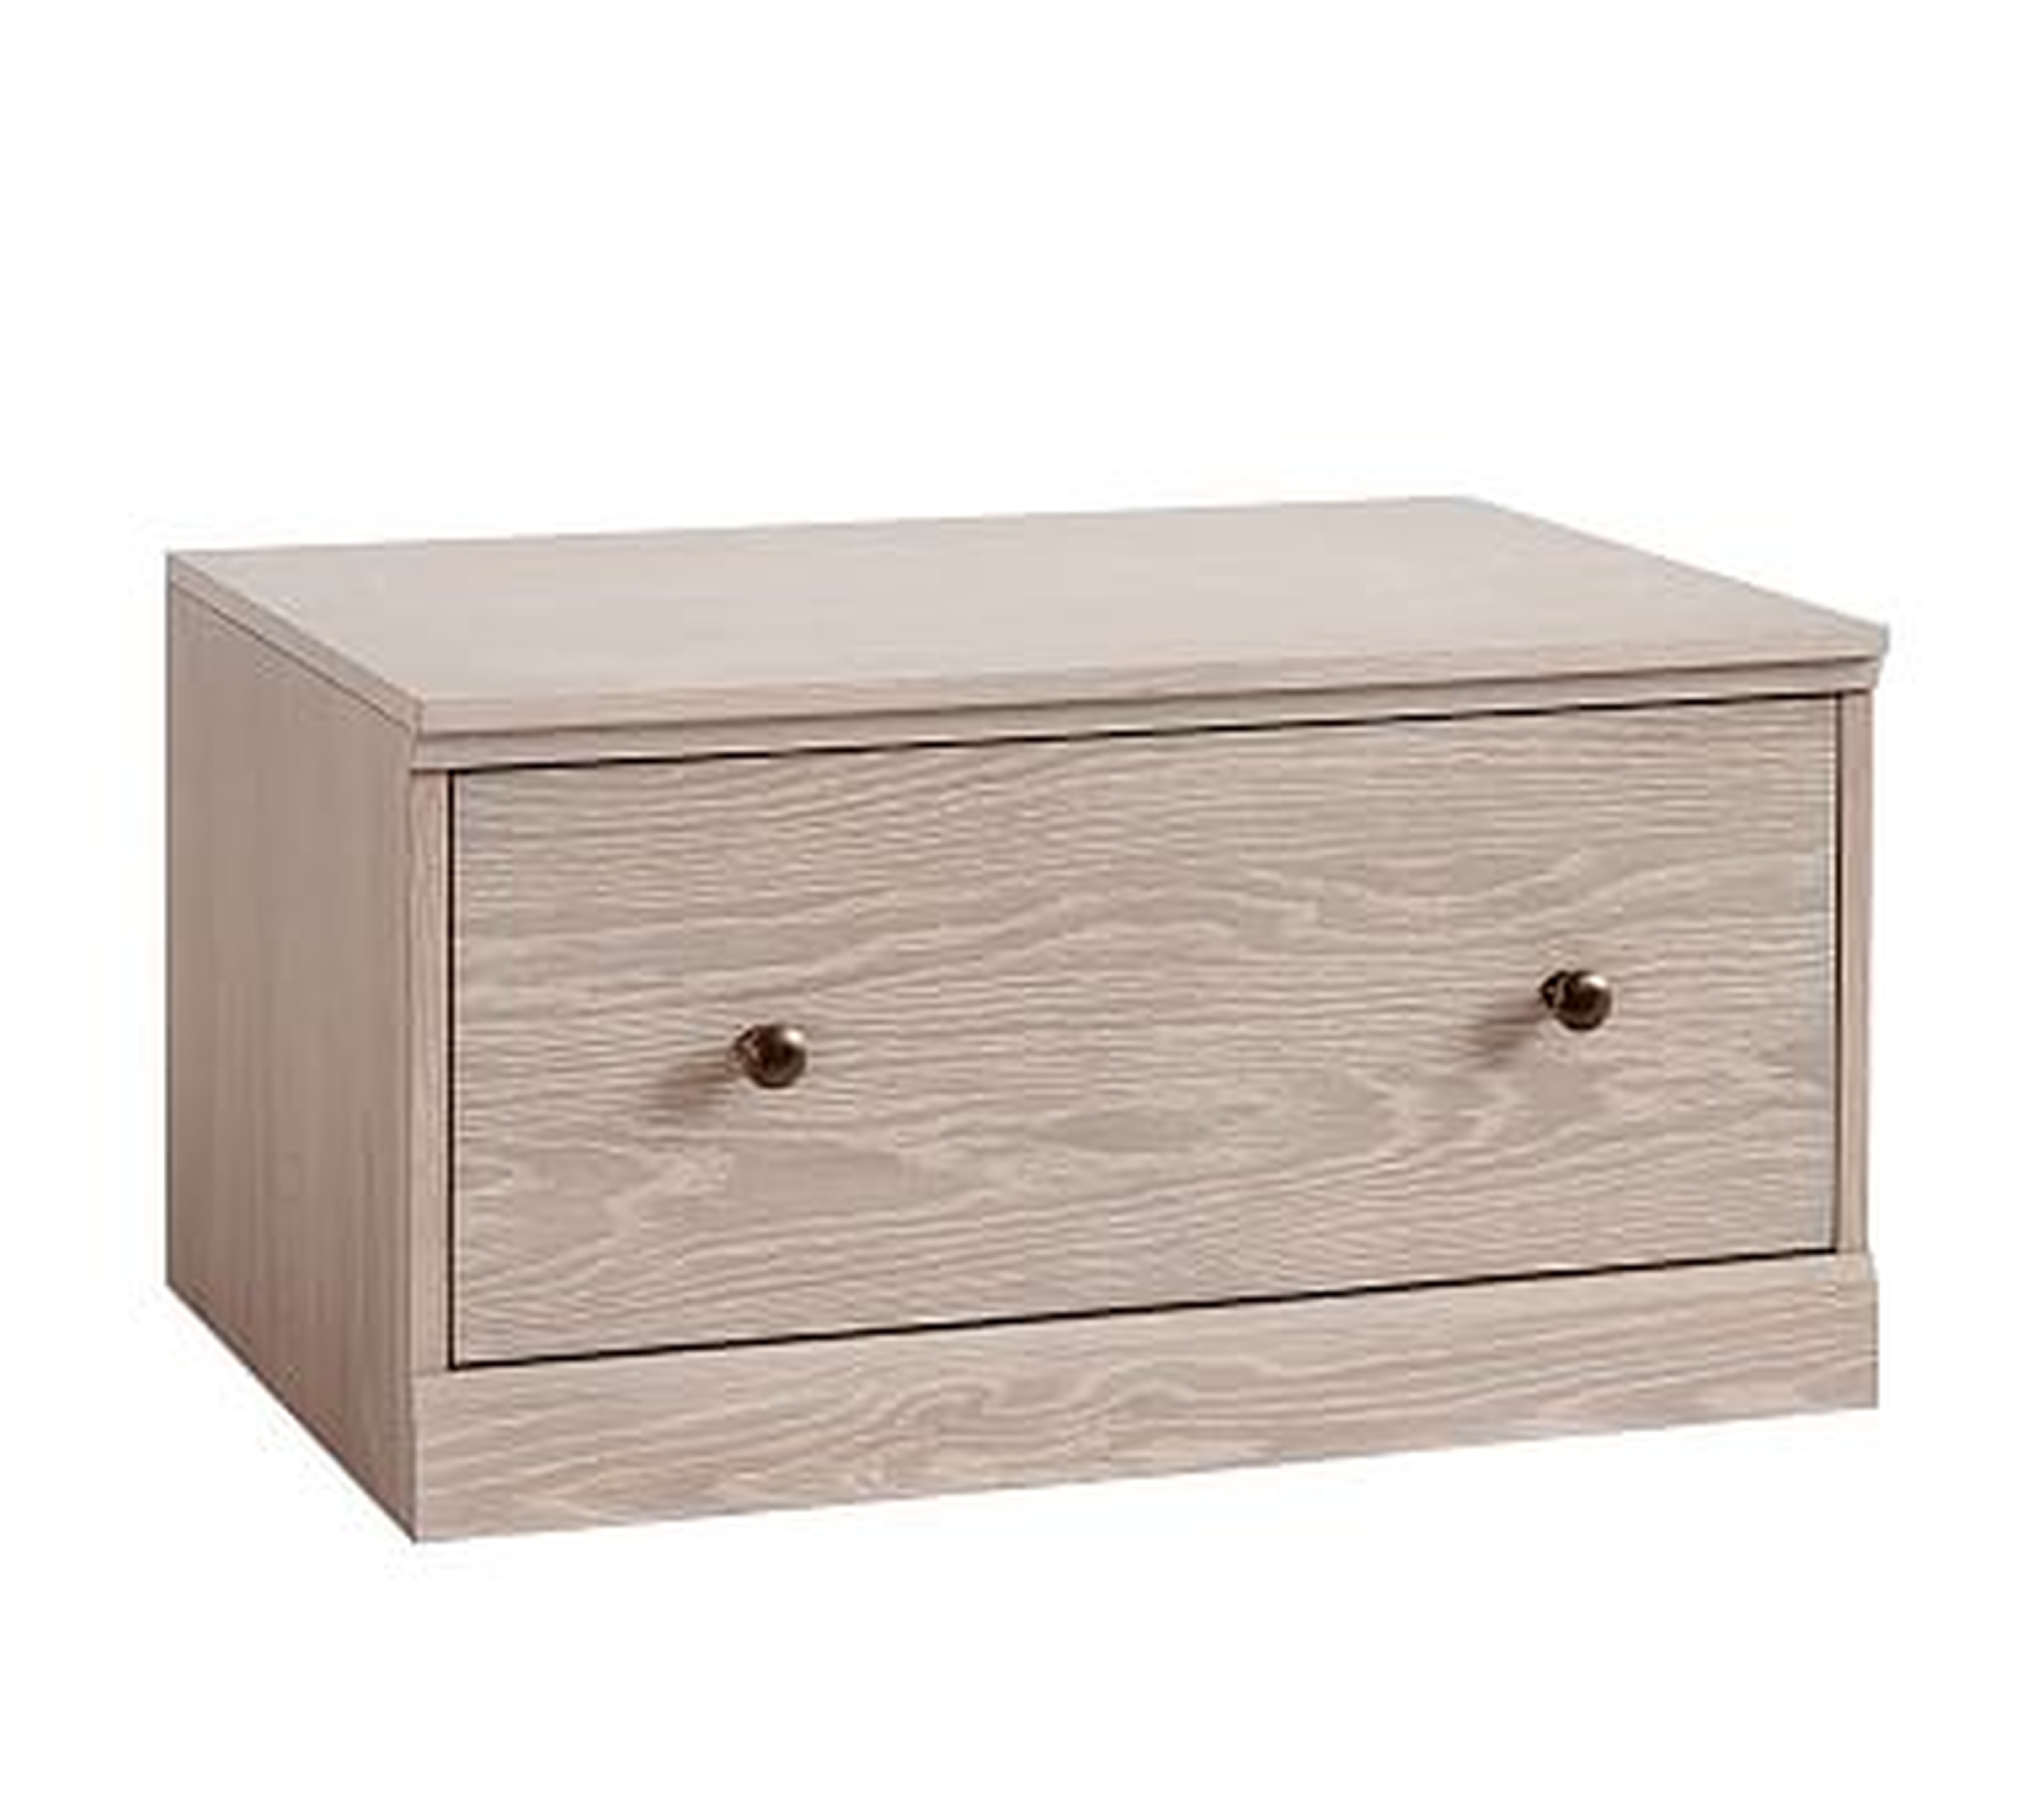 Cameron Drawer Base, Heritage Fog, In-Home Delivery - Pottery Barn Kids